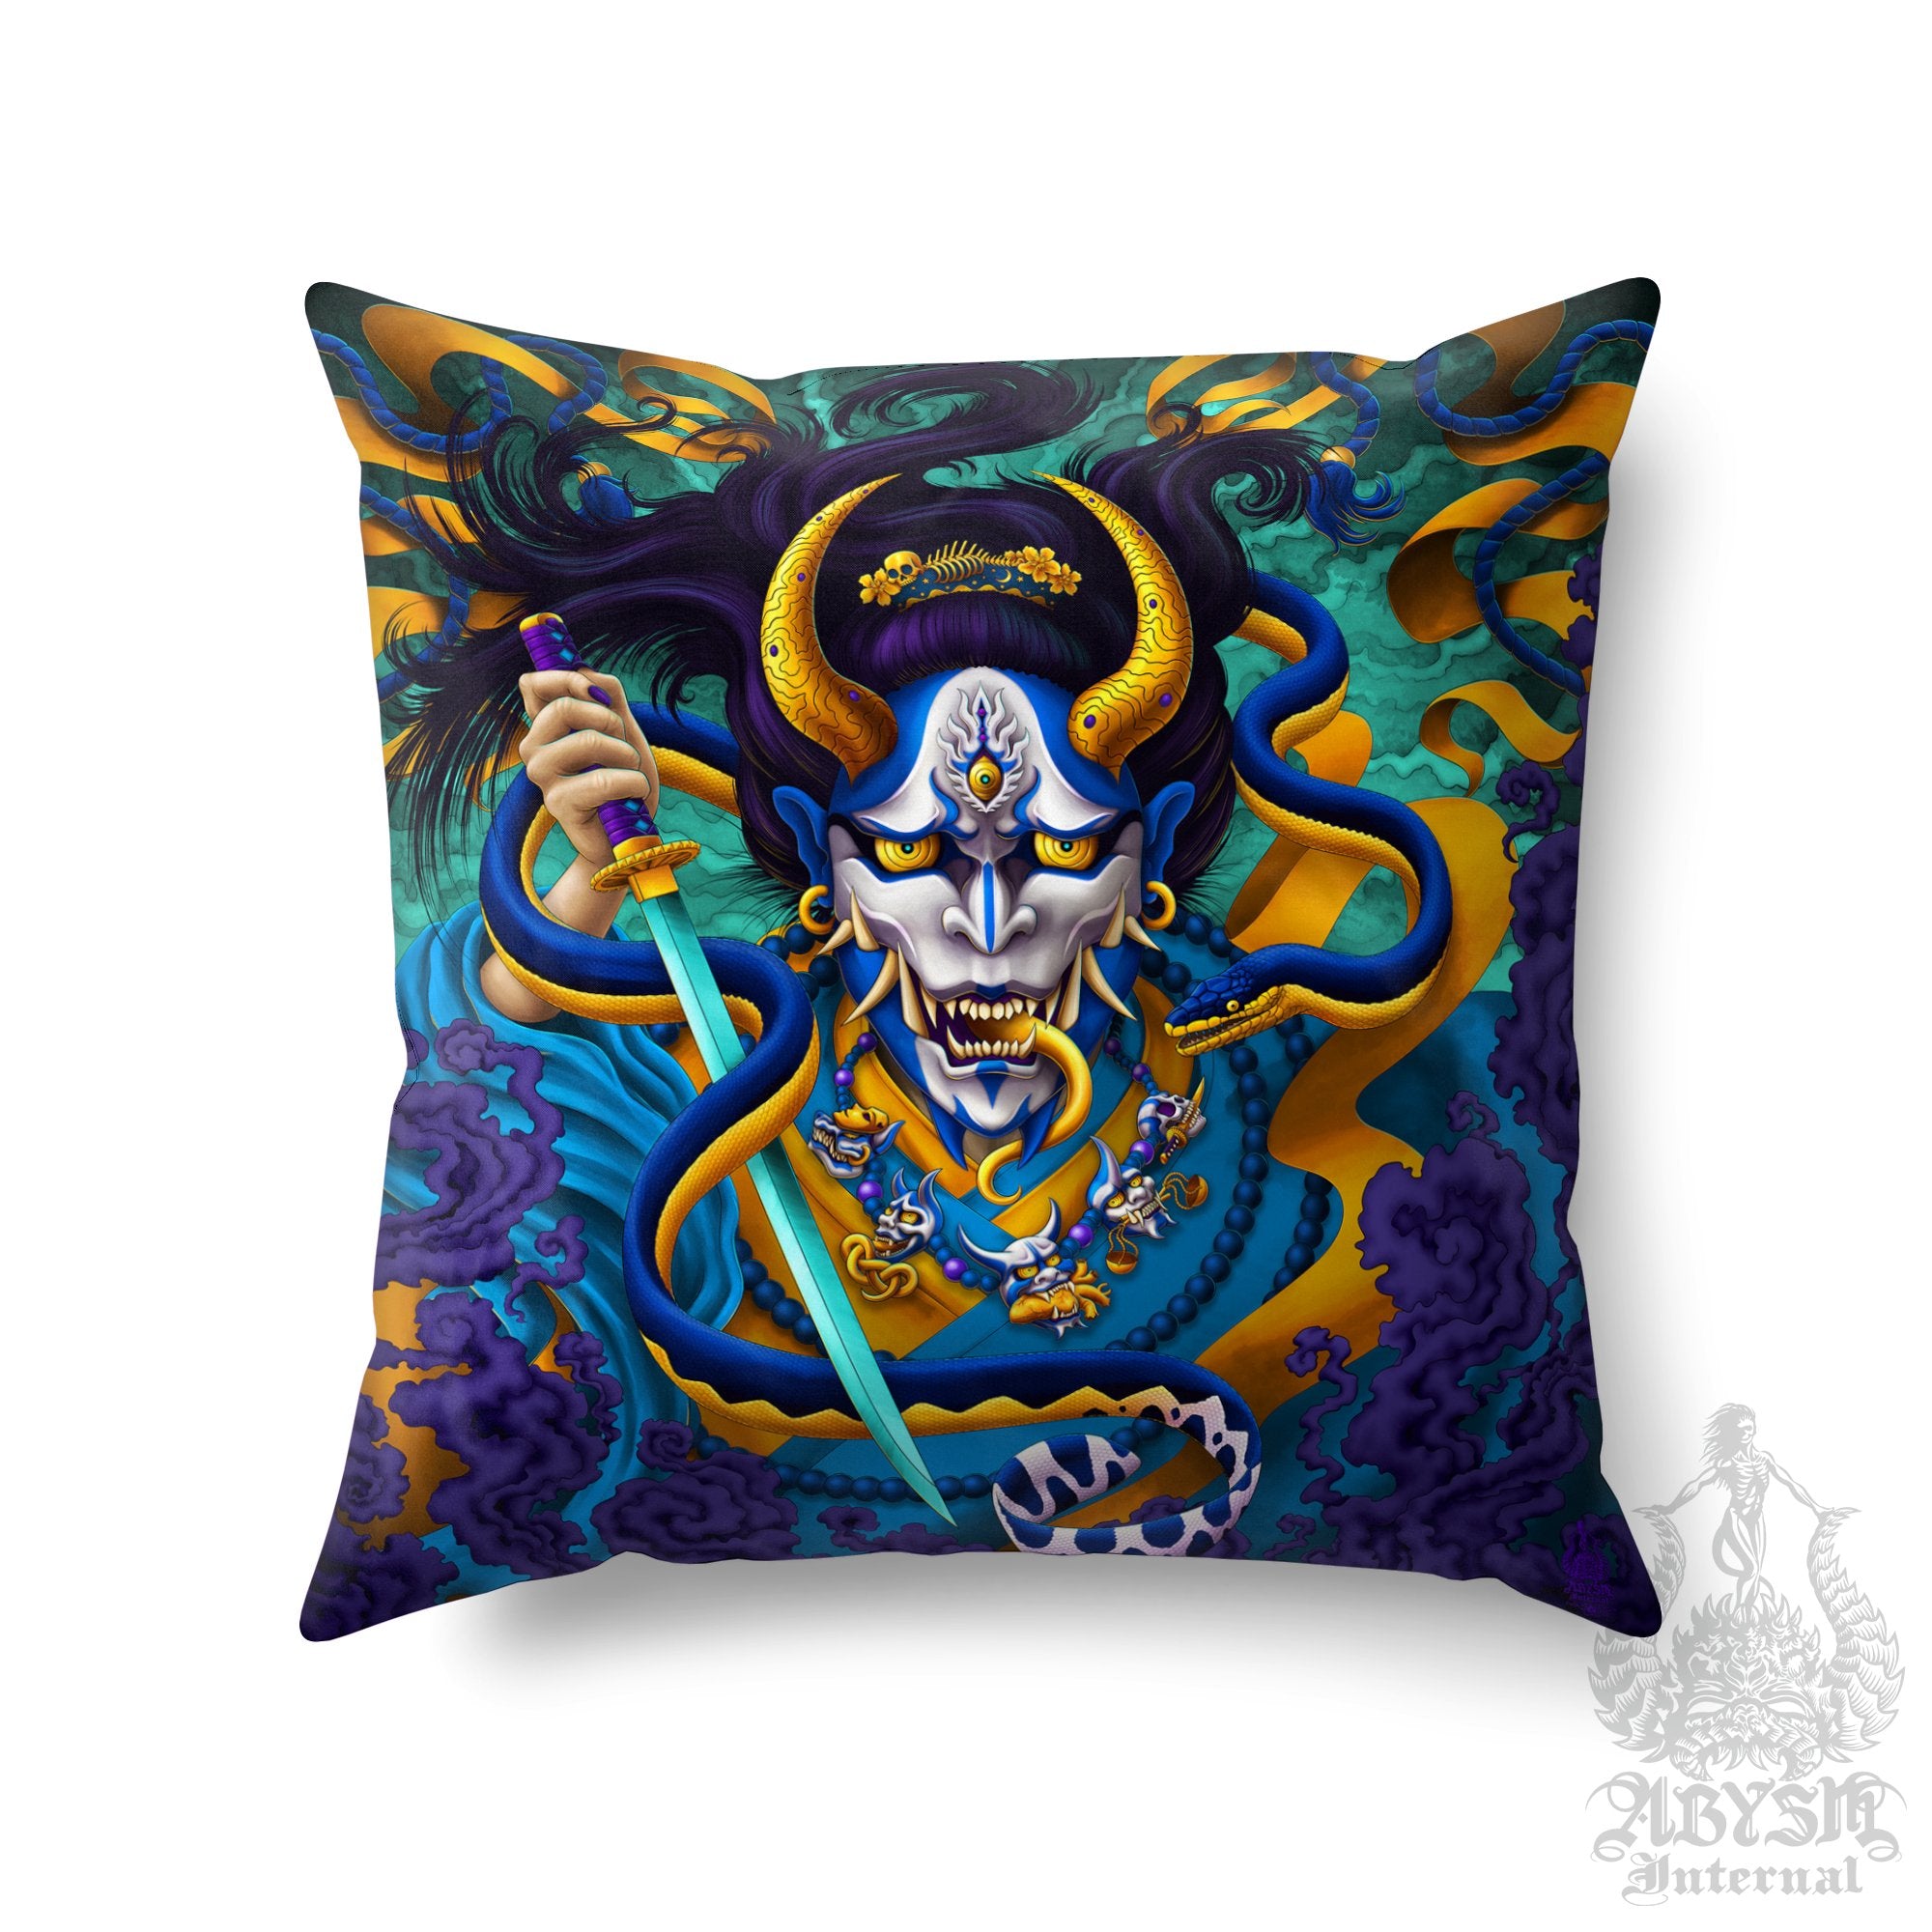 Hannya Throw Pillow, Decorative Accent Pillow, Square Cushion Cover, Japanese Demon & Snake, Gamer Room Decor - Cyan Gold - Abysm Internal